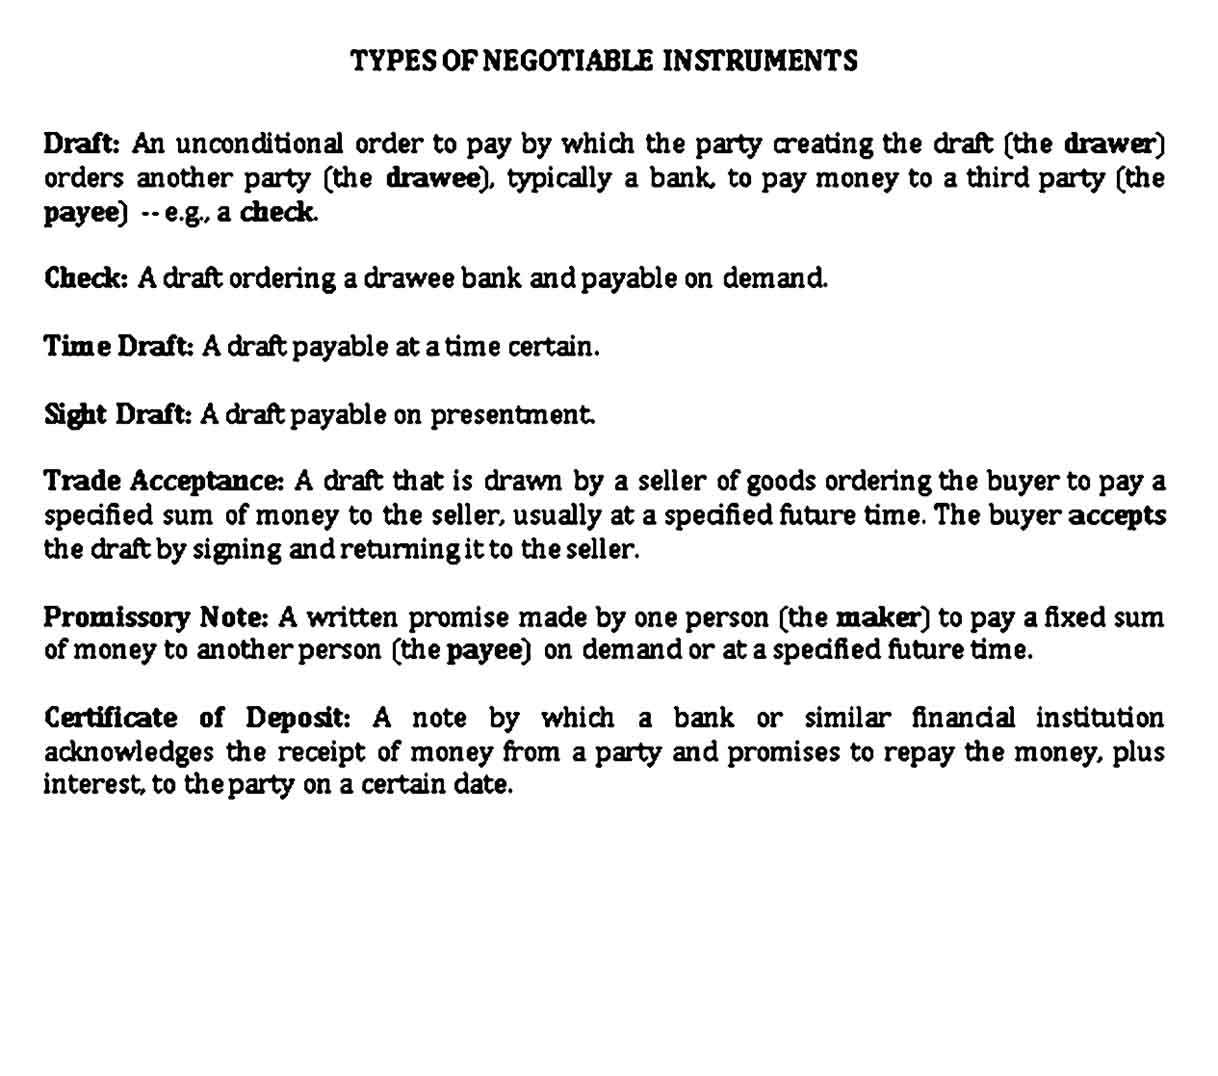 TYPES OF NEGOTIABLE INSTRUMENTS